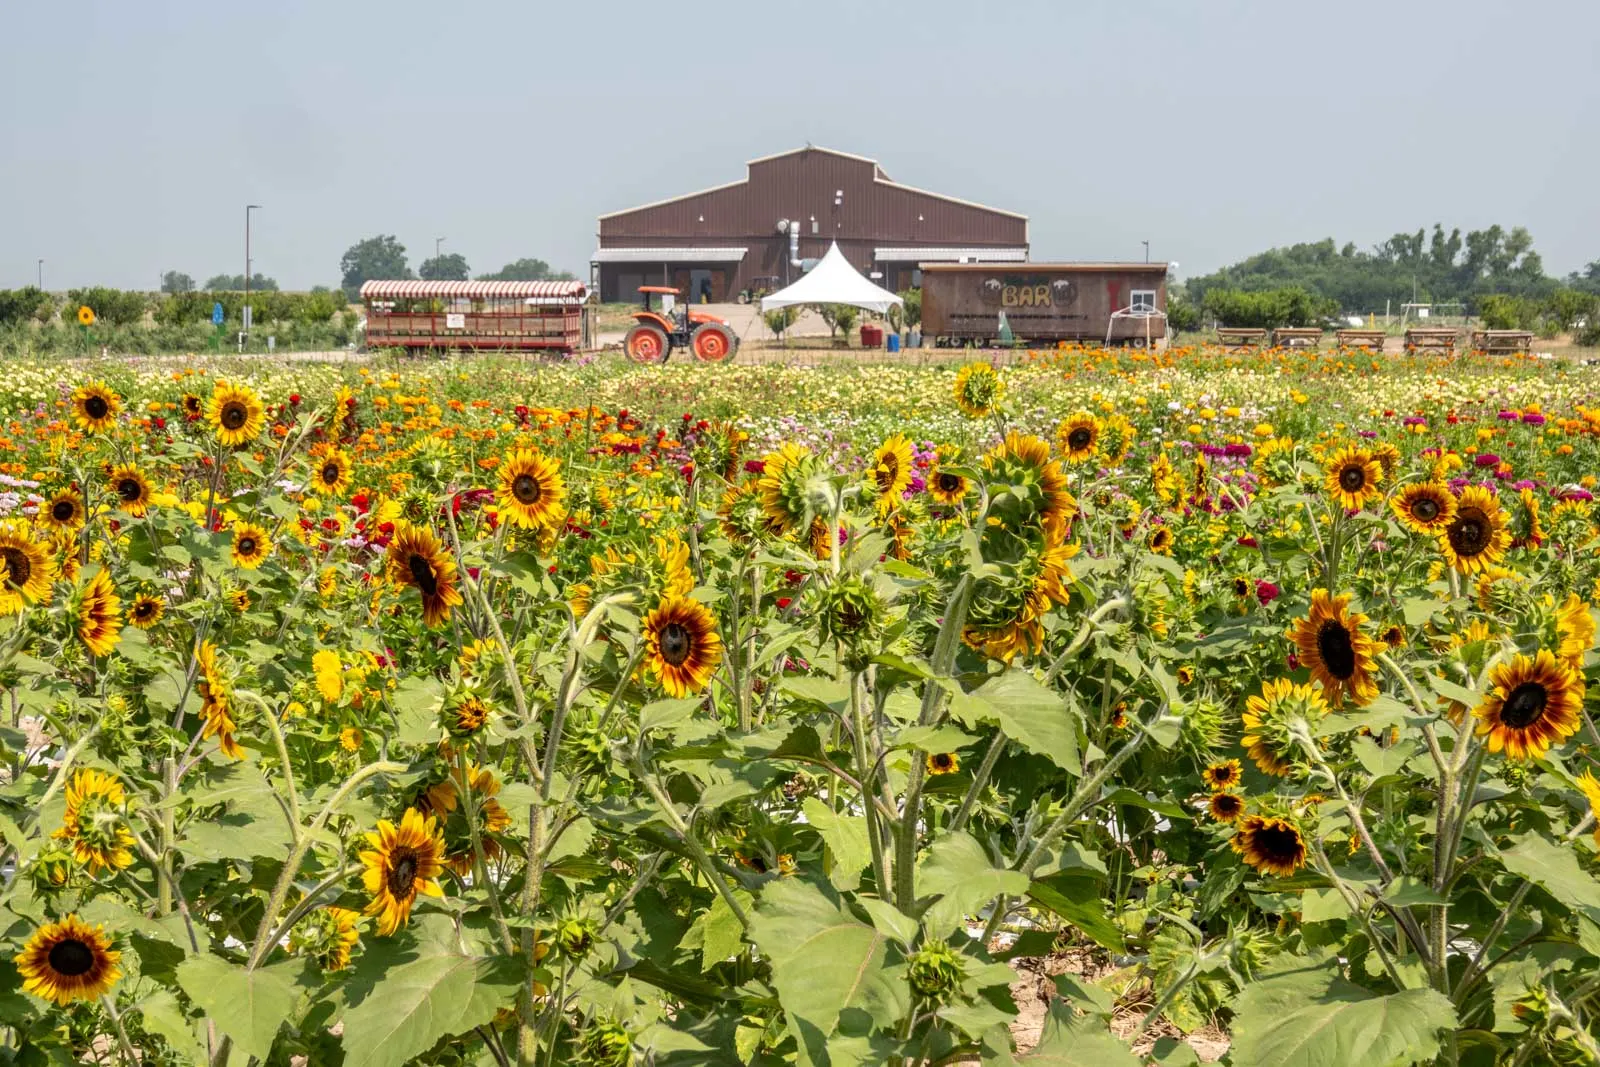 Sunflower field with a barn and wagon in the background